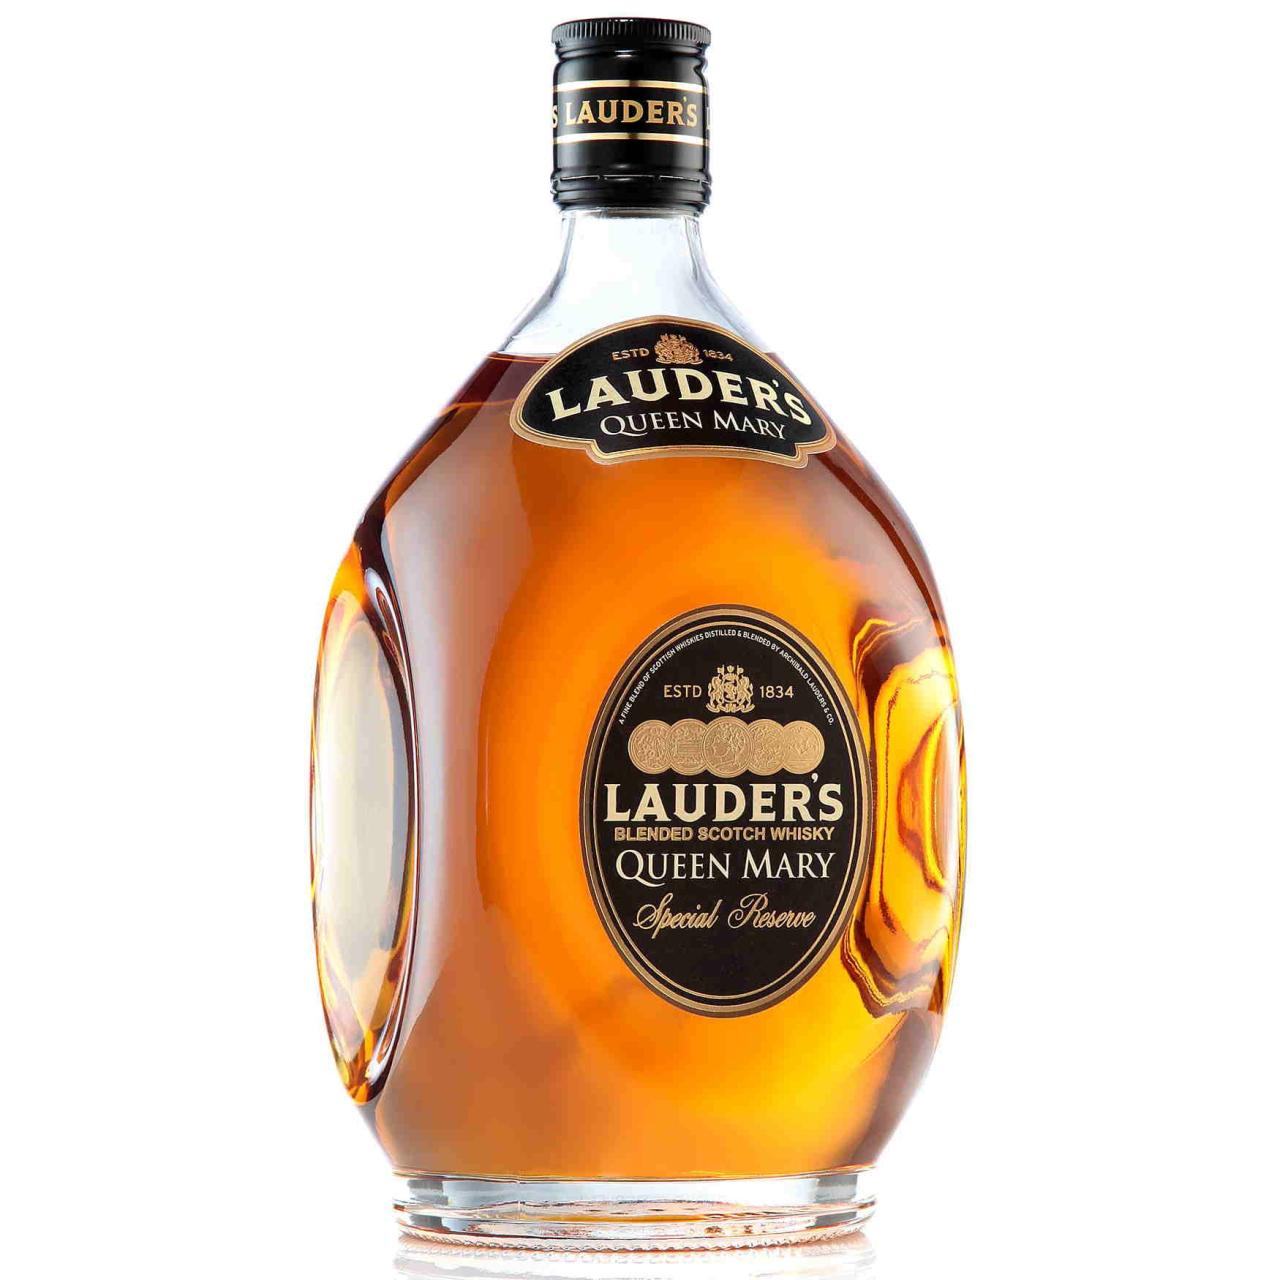 Lauder's Queen Mary Whisky 40% 1,0l